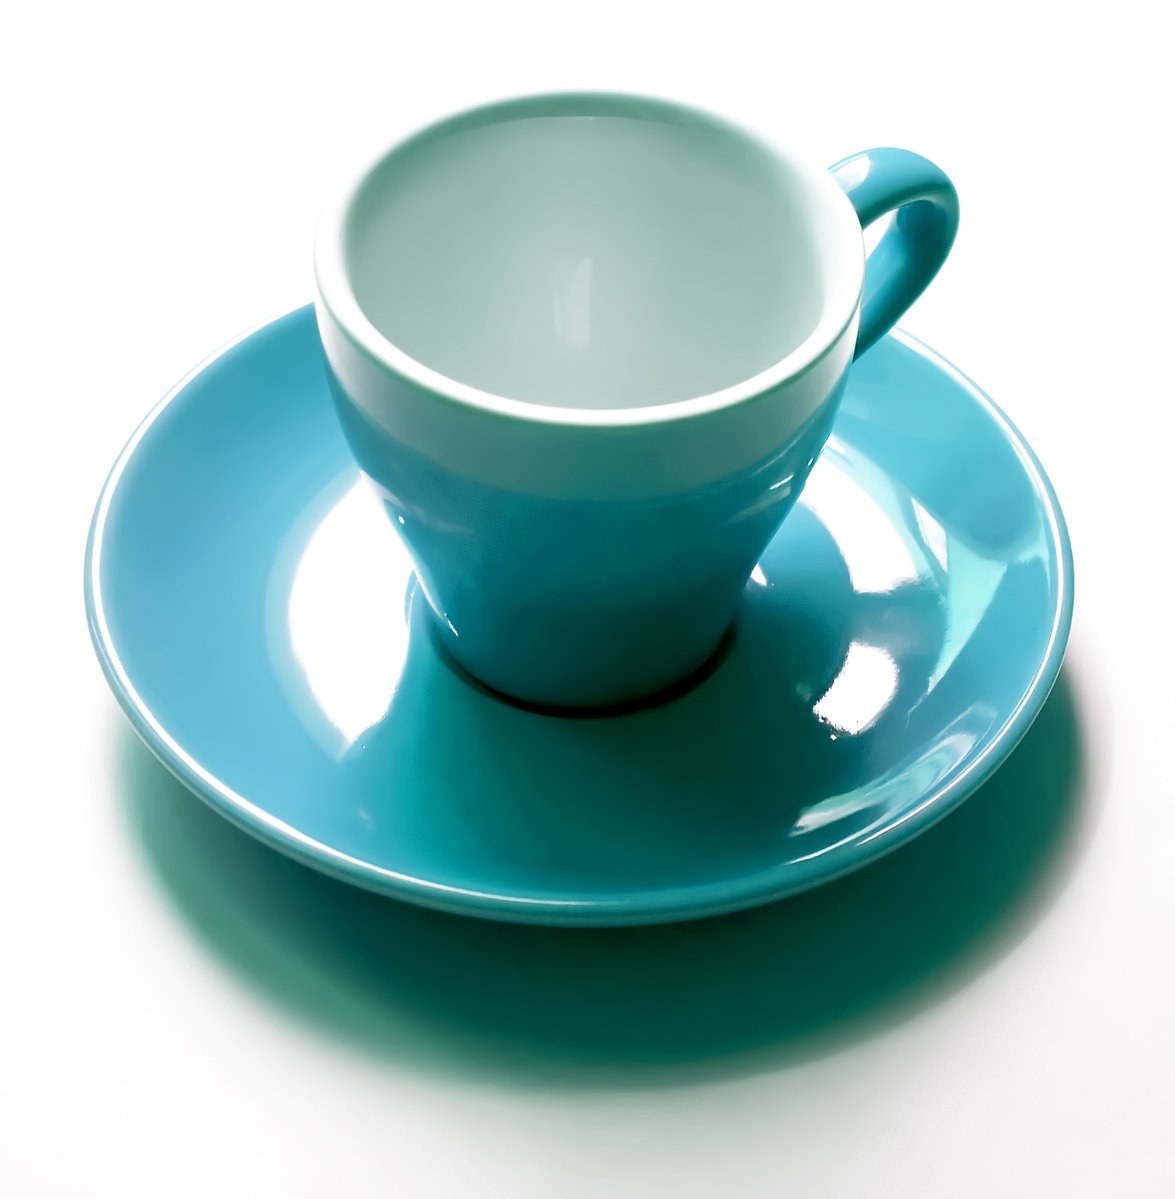 a tea cup and saucer with spoon on plate